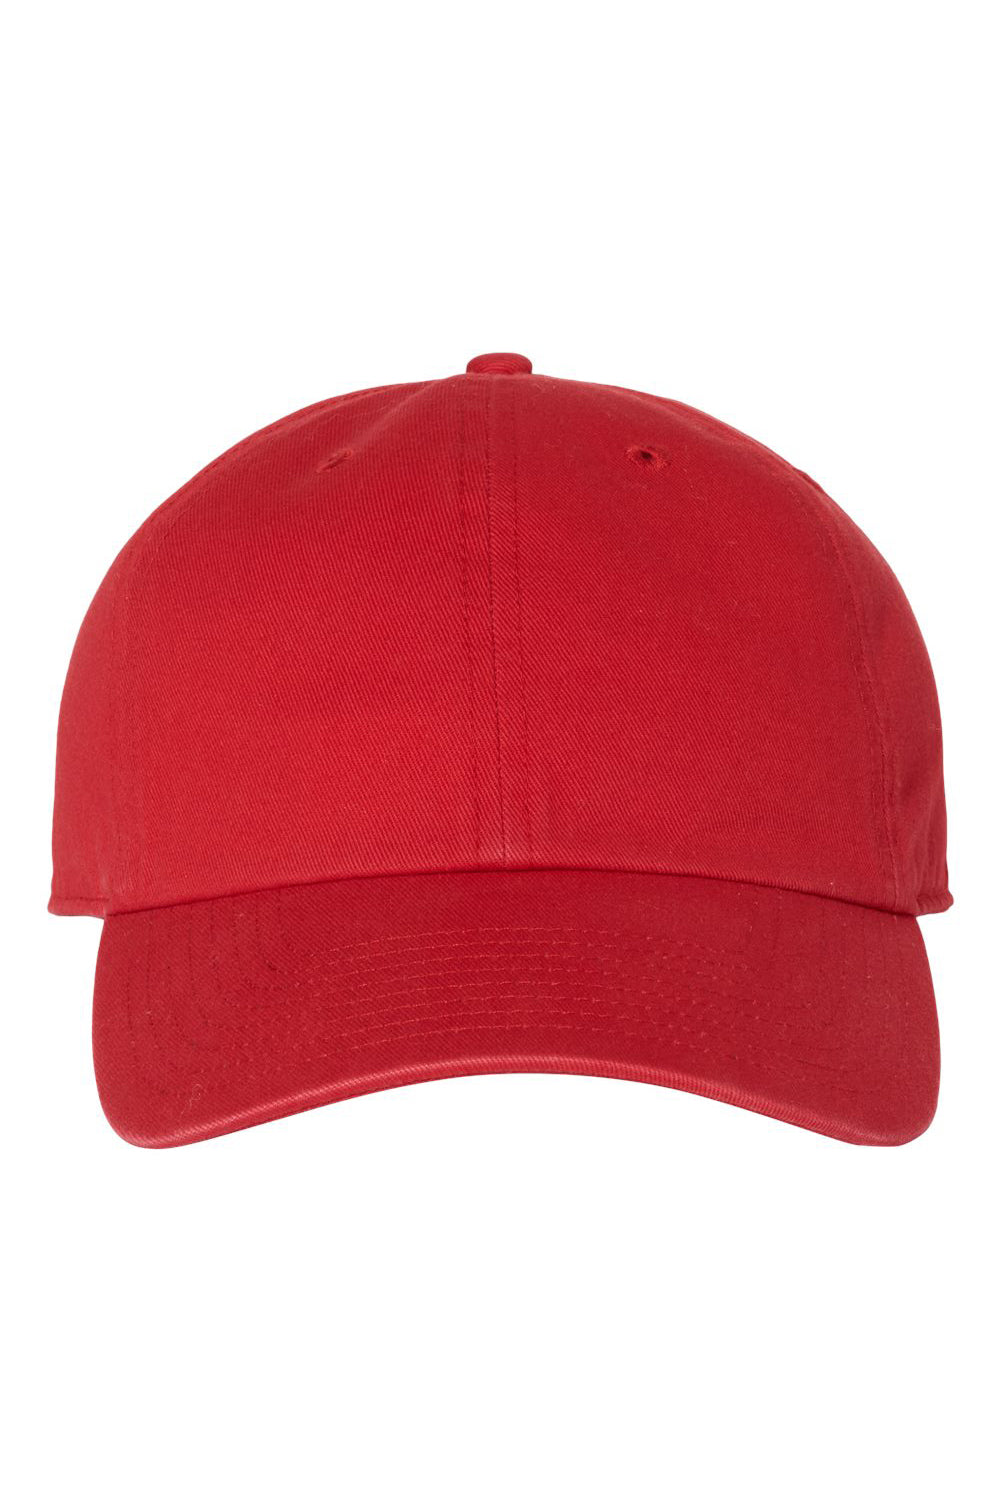 47 Brand 4700 Mens Clean Up Adjustable Hat Red Flat Front